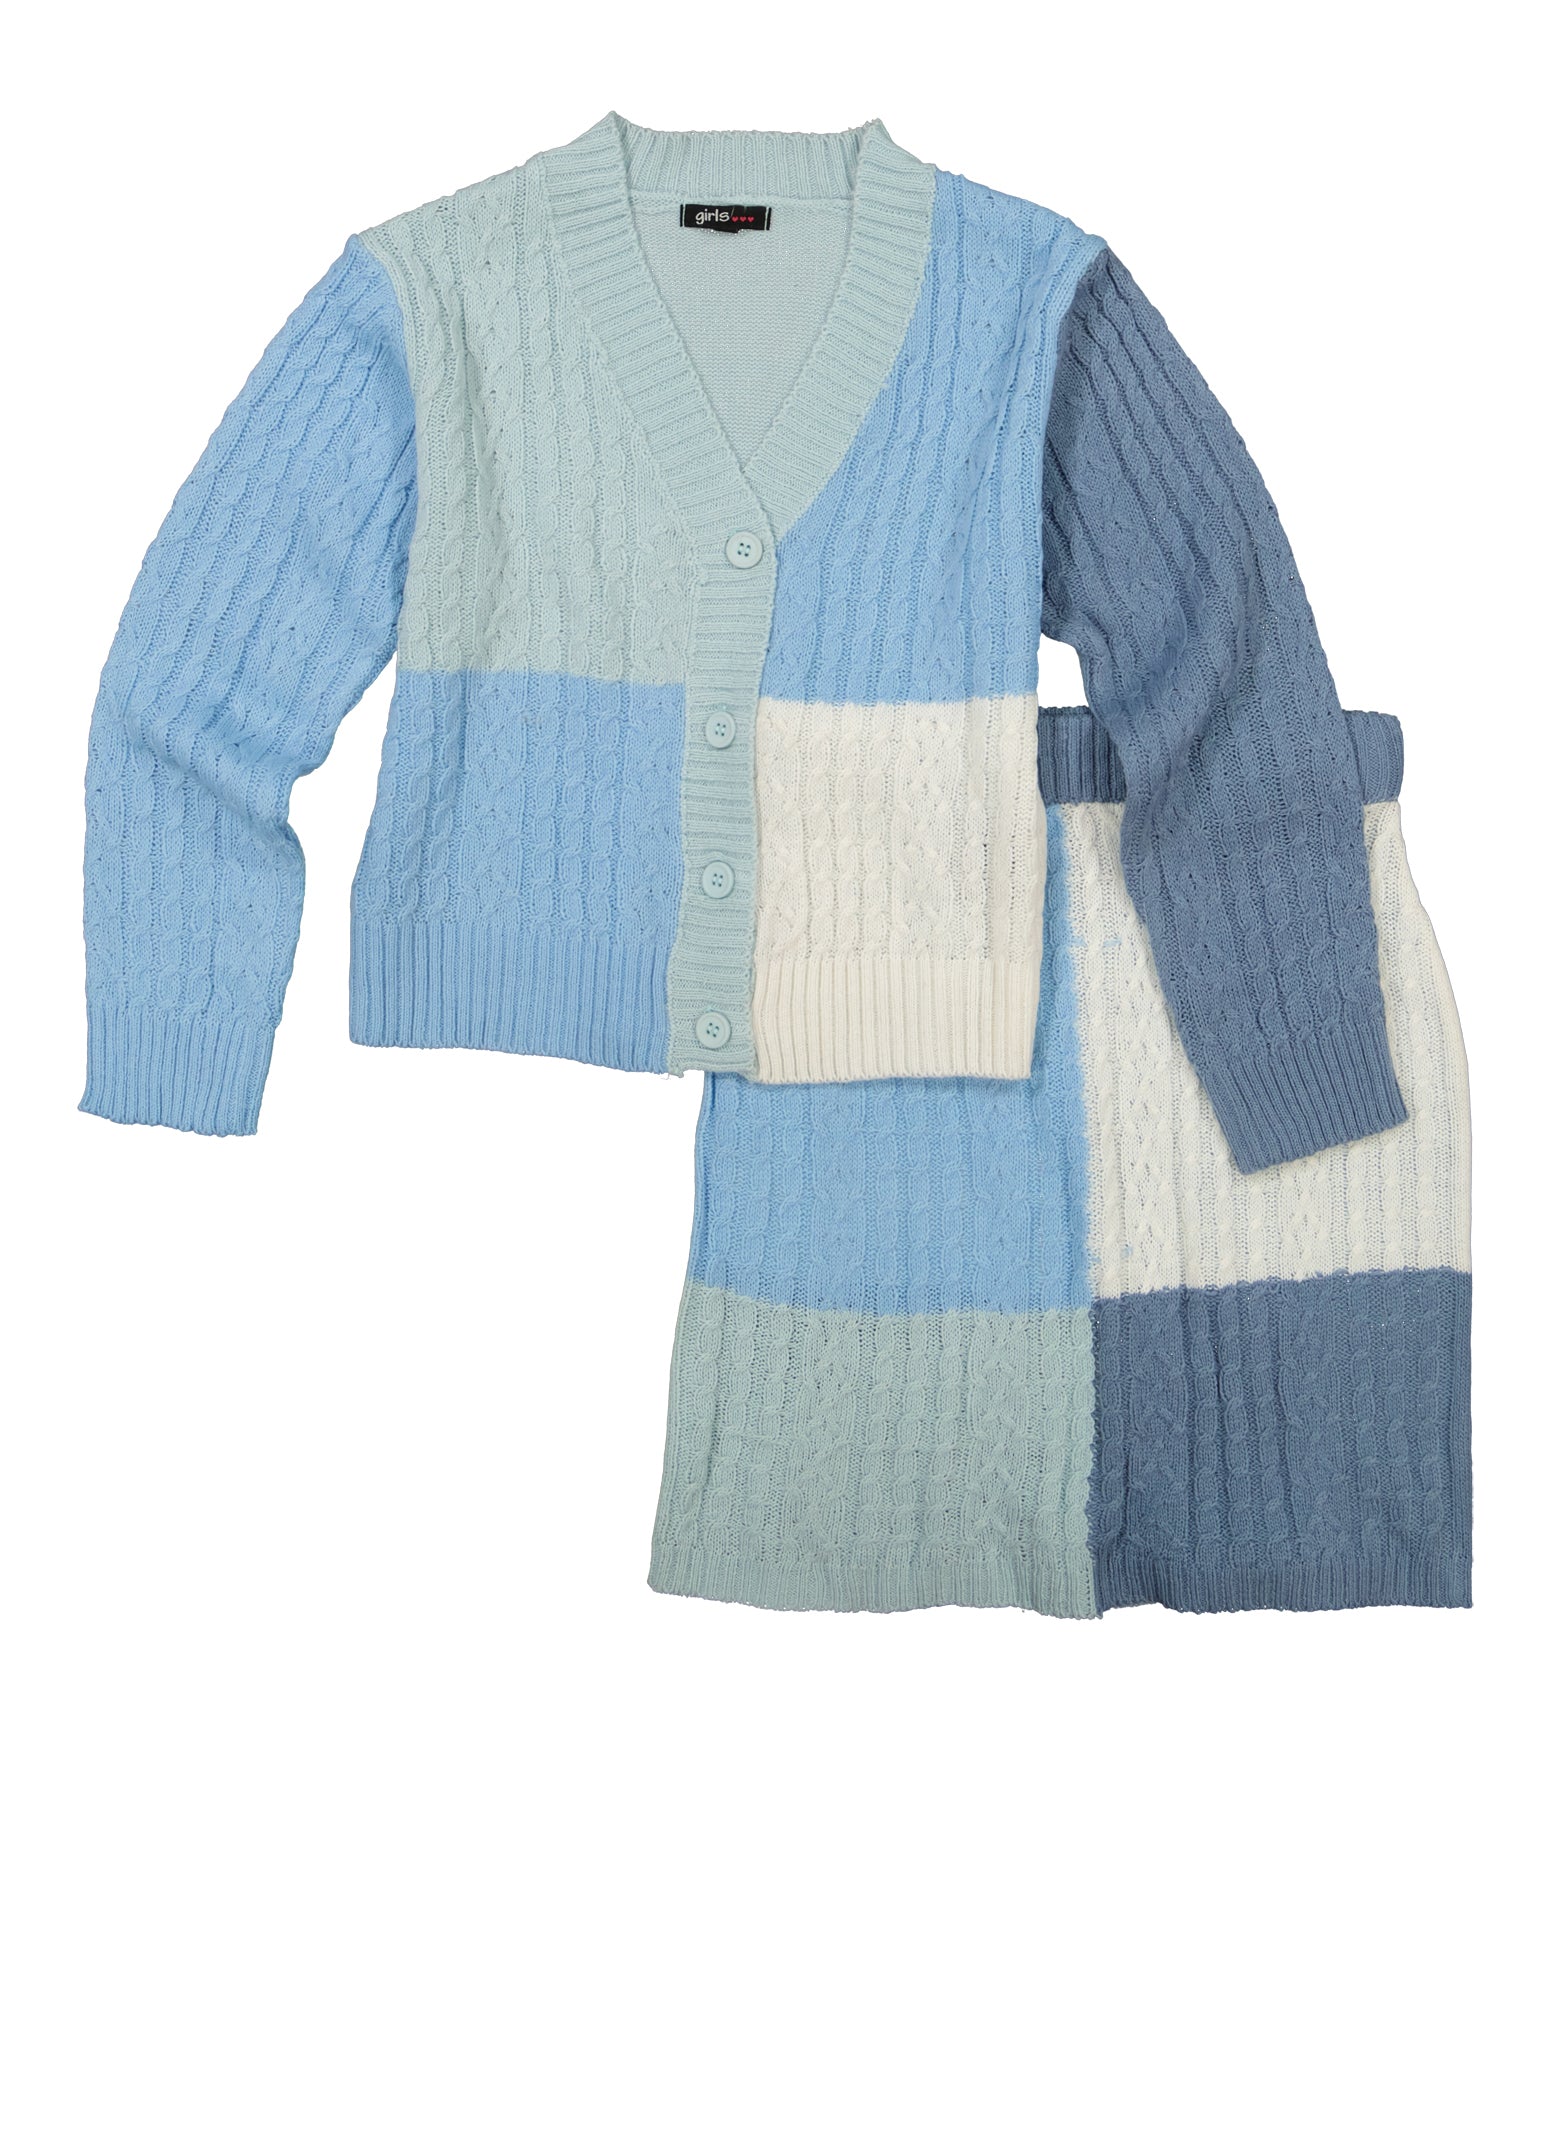 Girls Color Block Cardigan and Skirt Set, Blue, Size 10-12